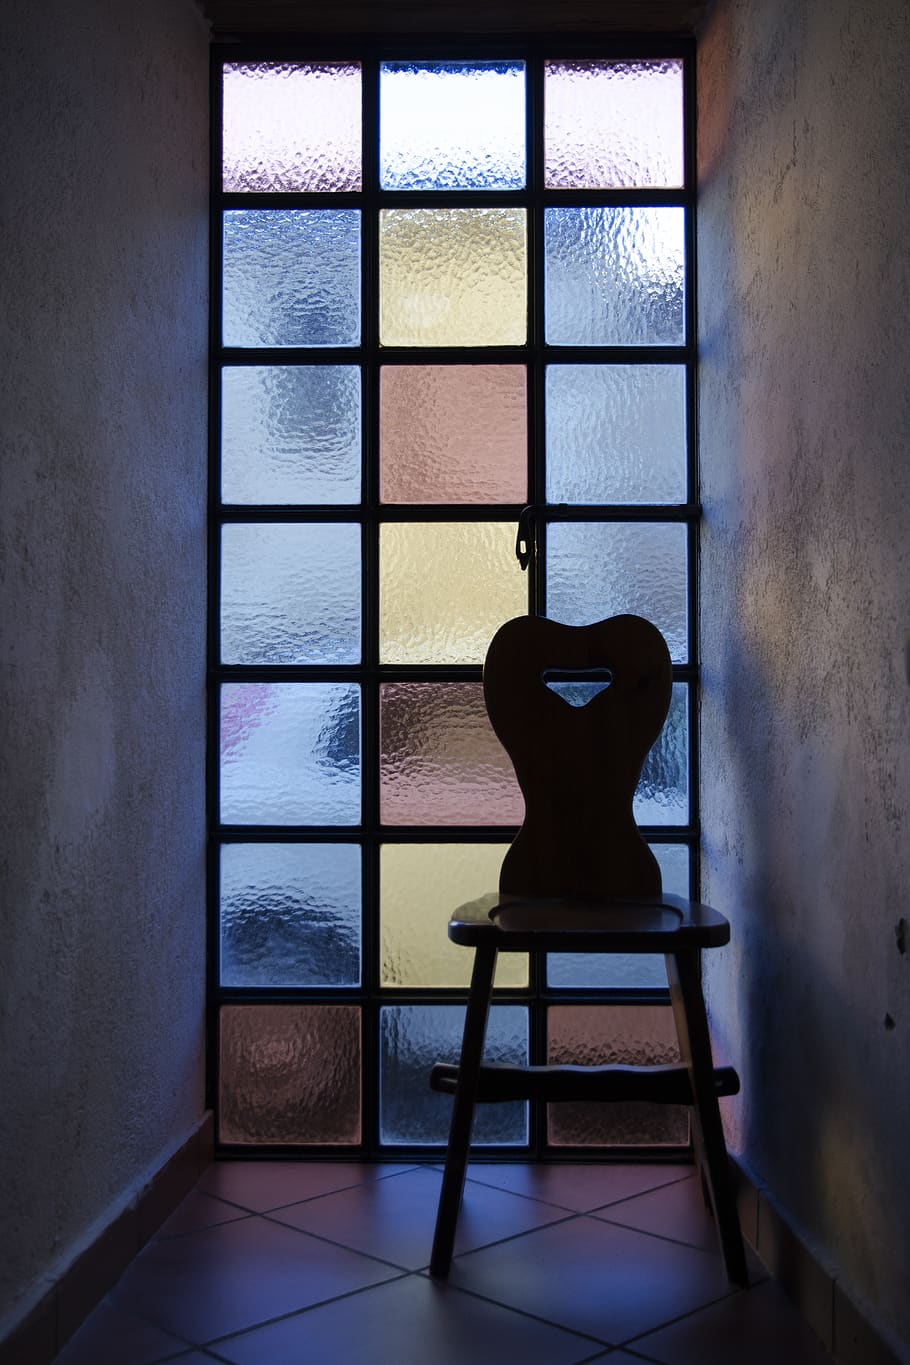 stained glass window, chair, fear, window, indoors, seat, home interior, day, glass - material, architecture